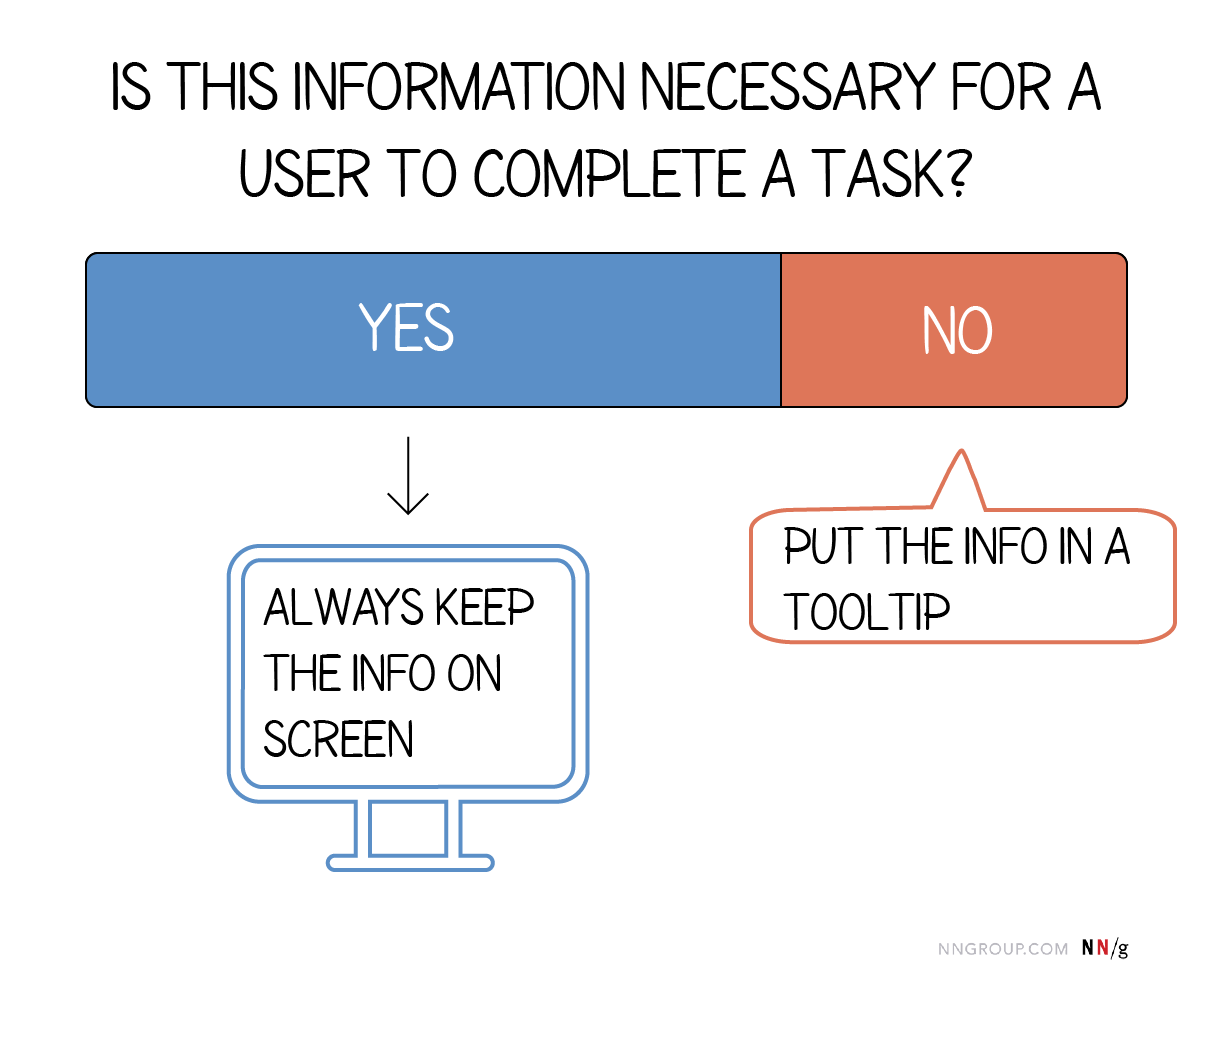 Graphic explaining when to use a tooltip. If the information is necessary for a user to complete a task, always keep the information on the screen and not in a tooltip.